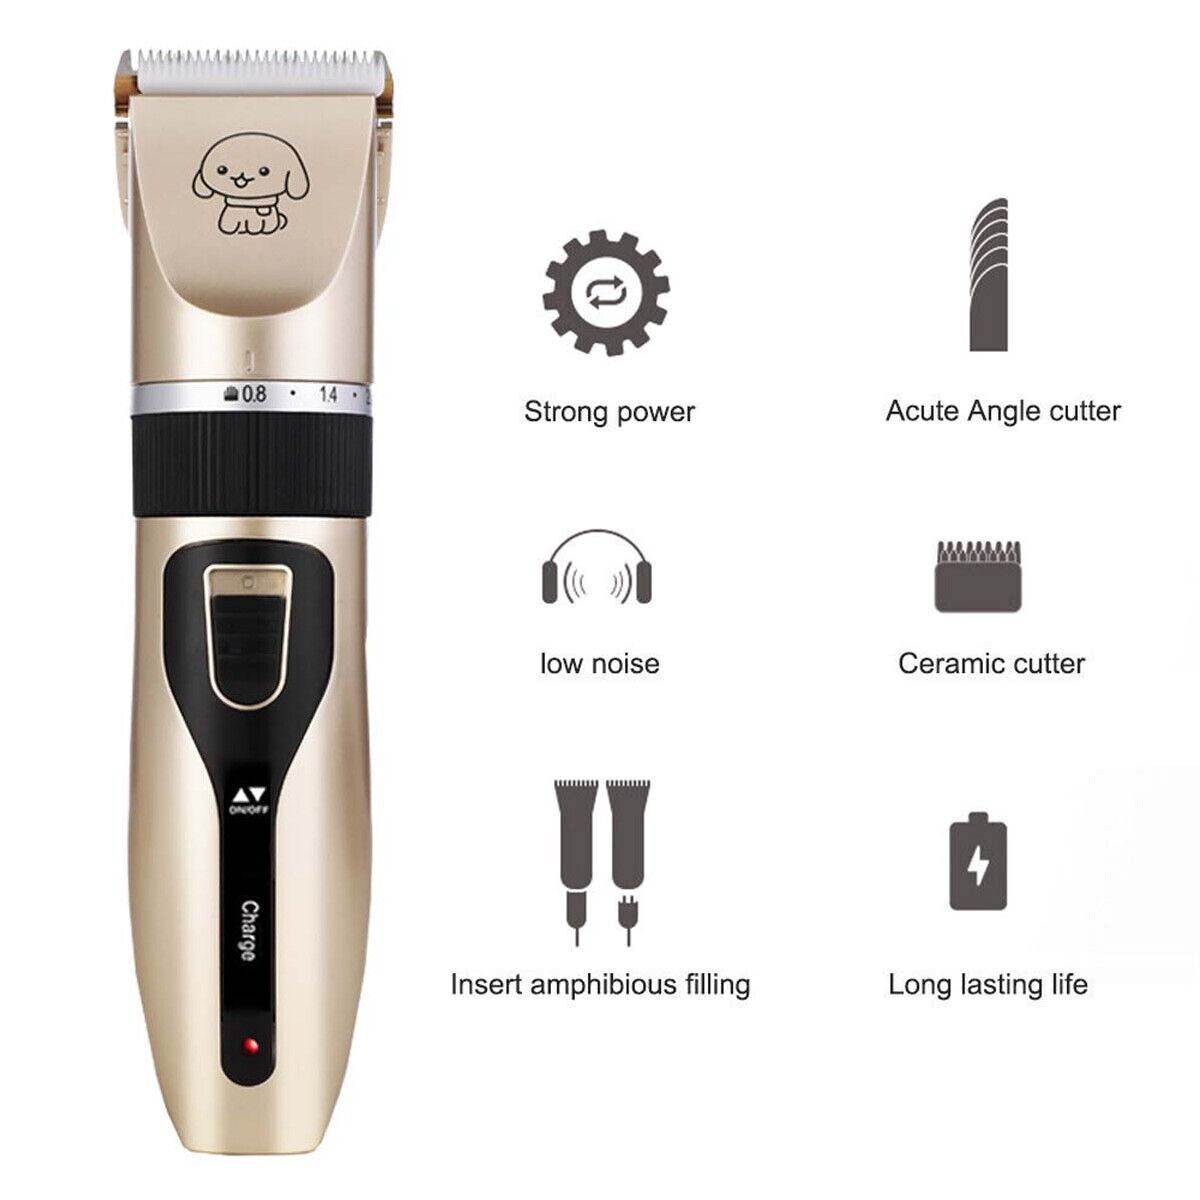 Cat Dog Pet Clippers Hair Electric Clipper Grooming Trimmer Shaver Cordless Set - Office Catch